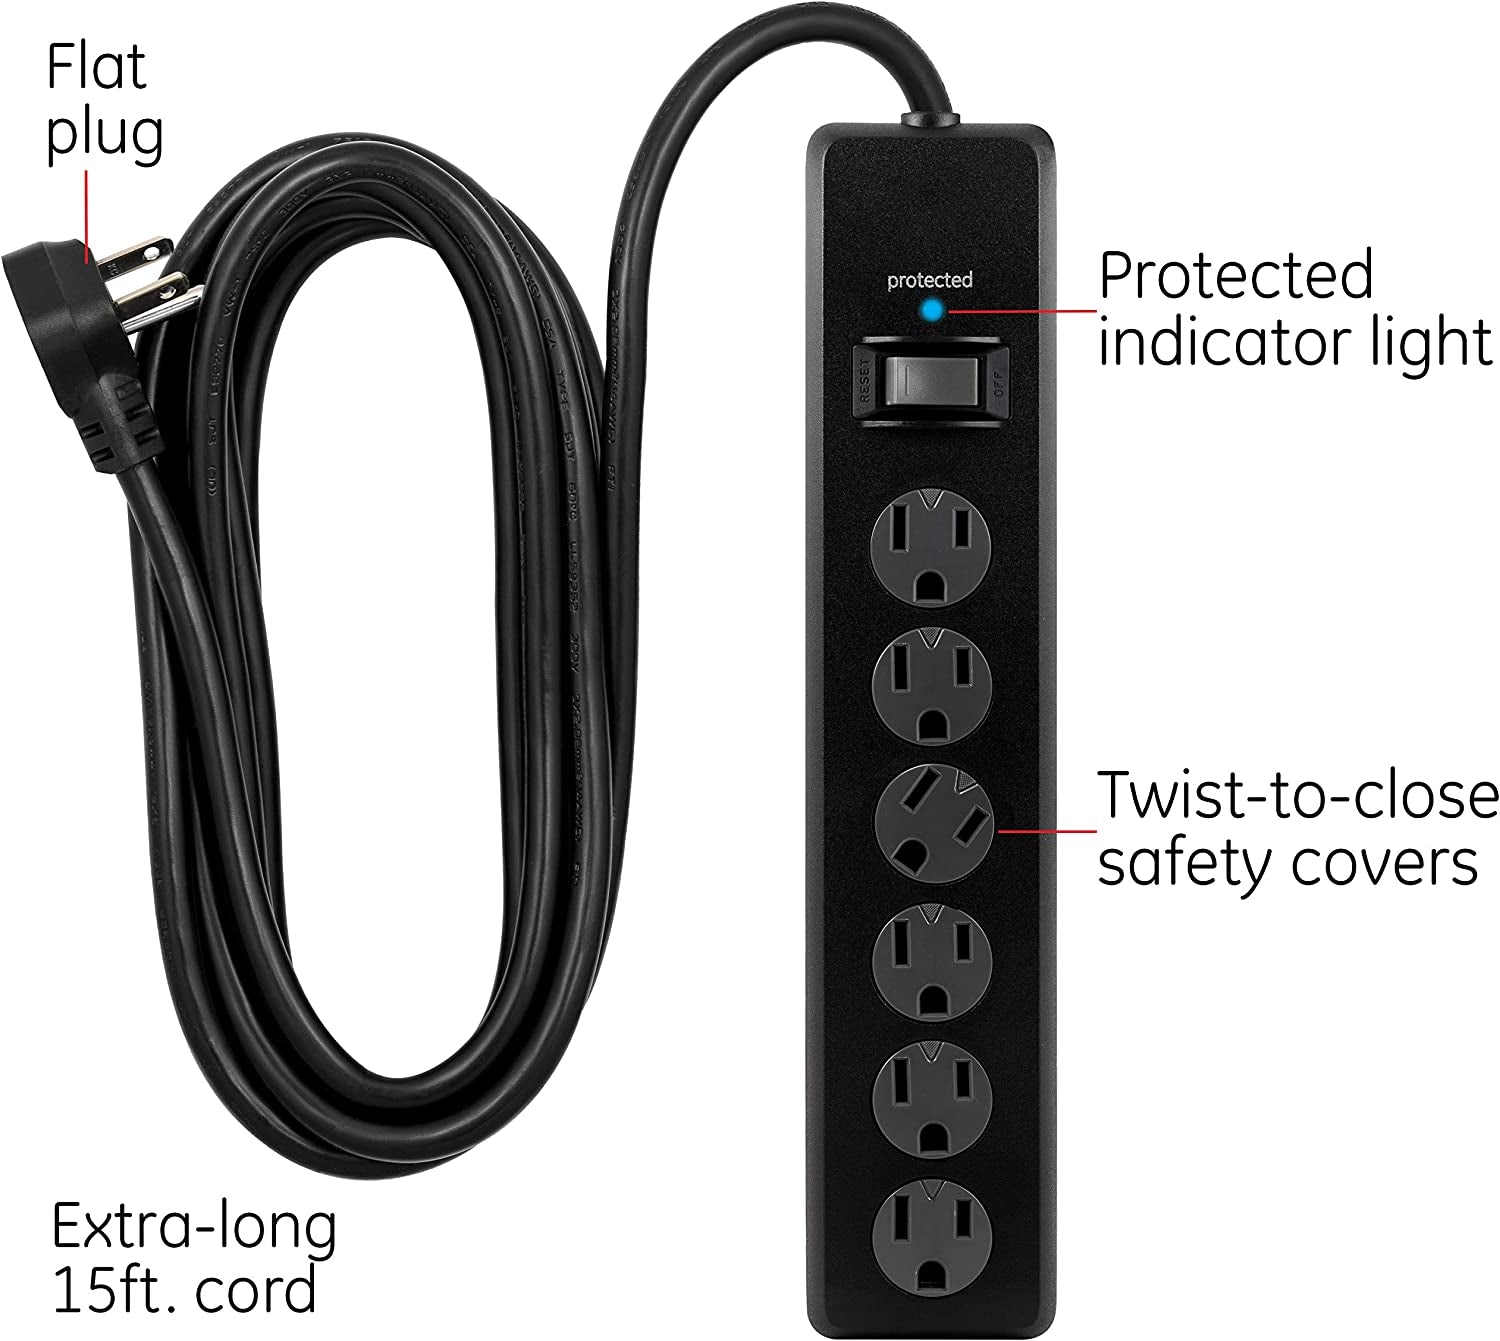 6-Outlet Sur Protector, 15 Ft Extension Cord, Power Strip, 800 Joules, Flat Plug, Twist-To-Close Safety Covers, Protected Indicator Light, UL Listed, Black, 50767